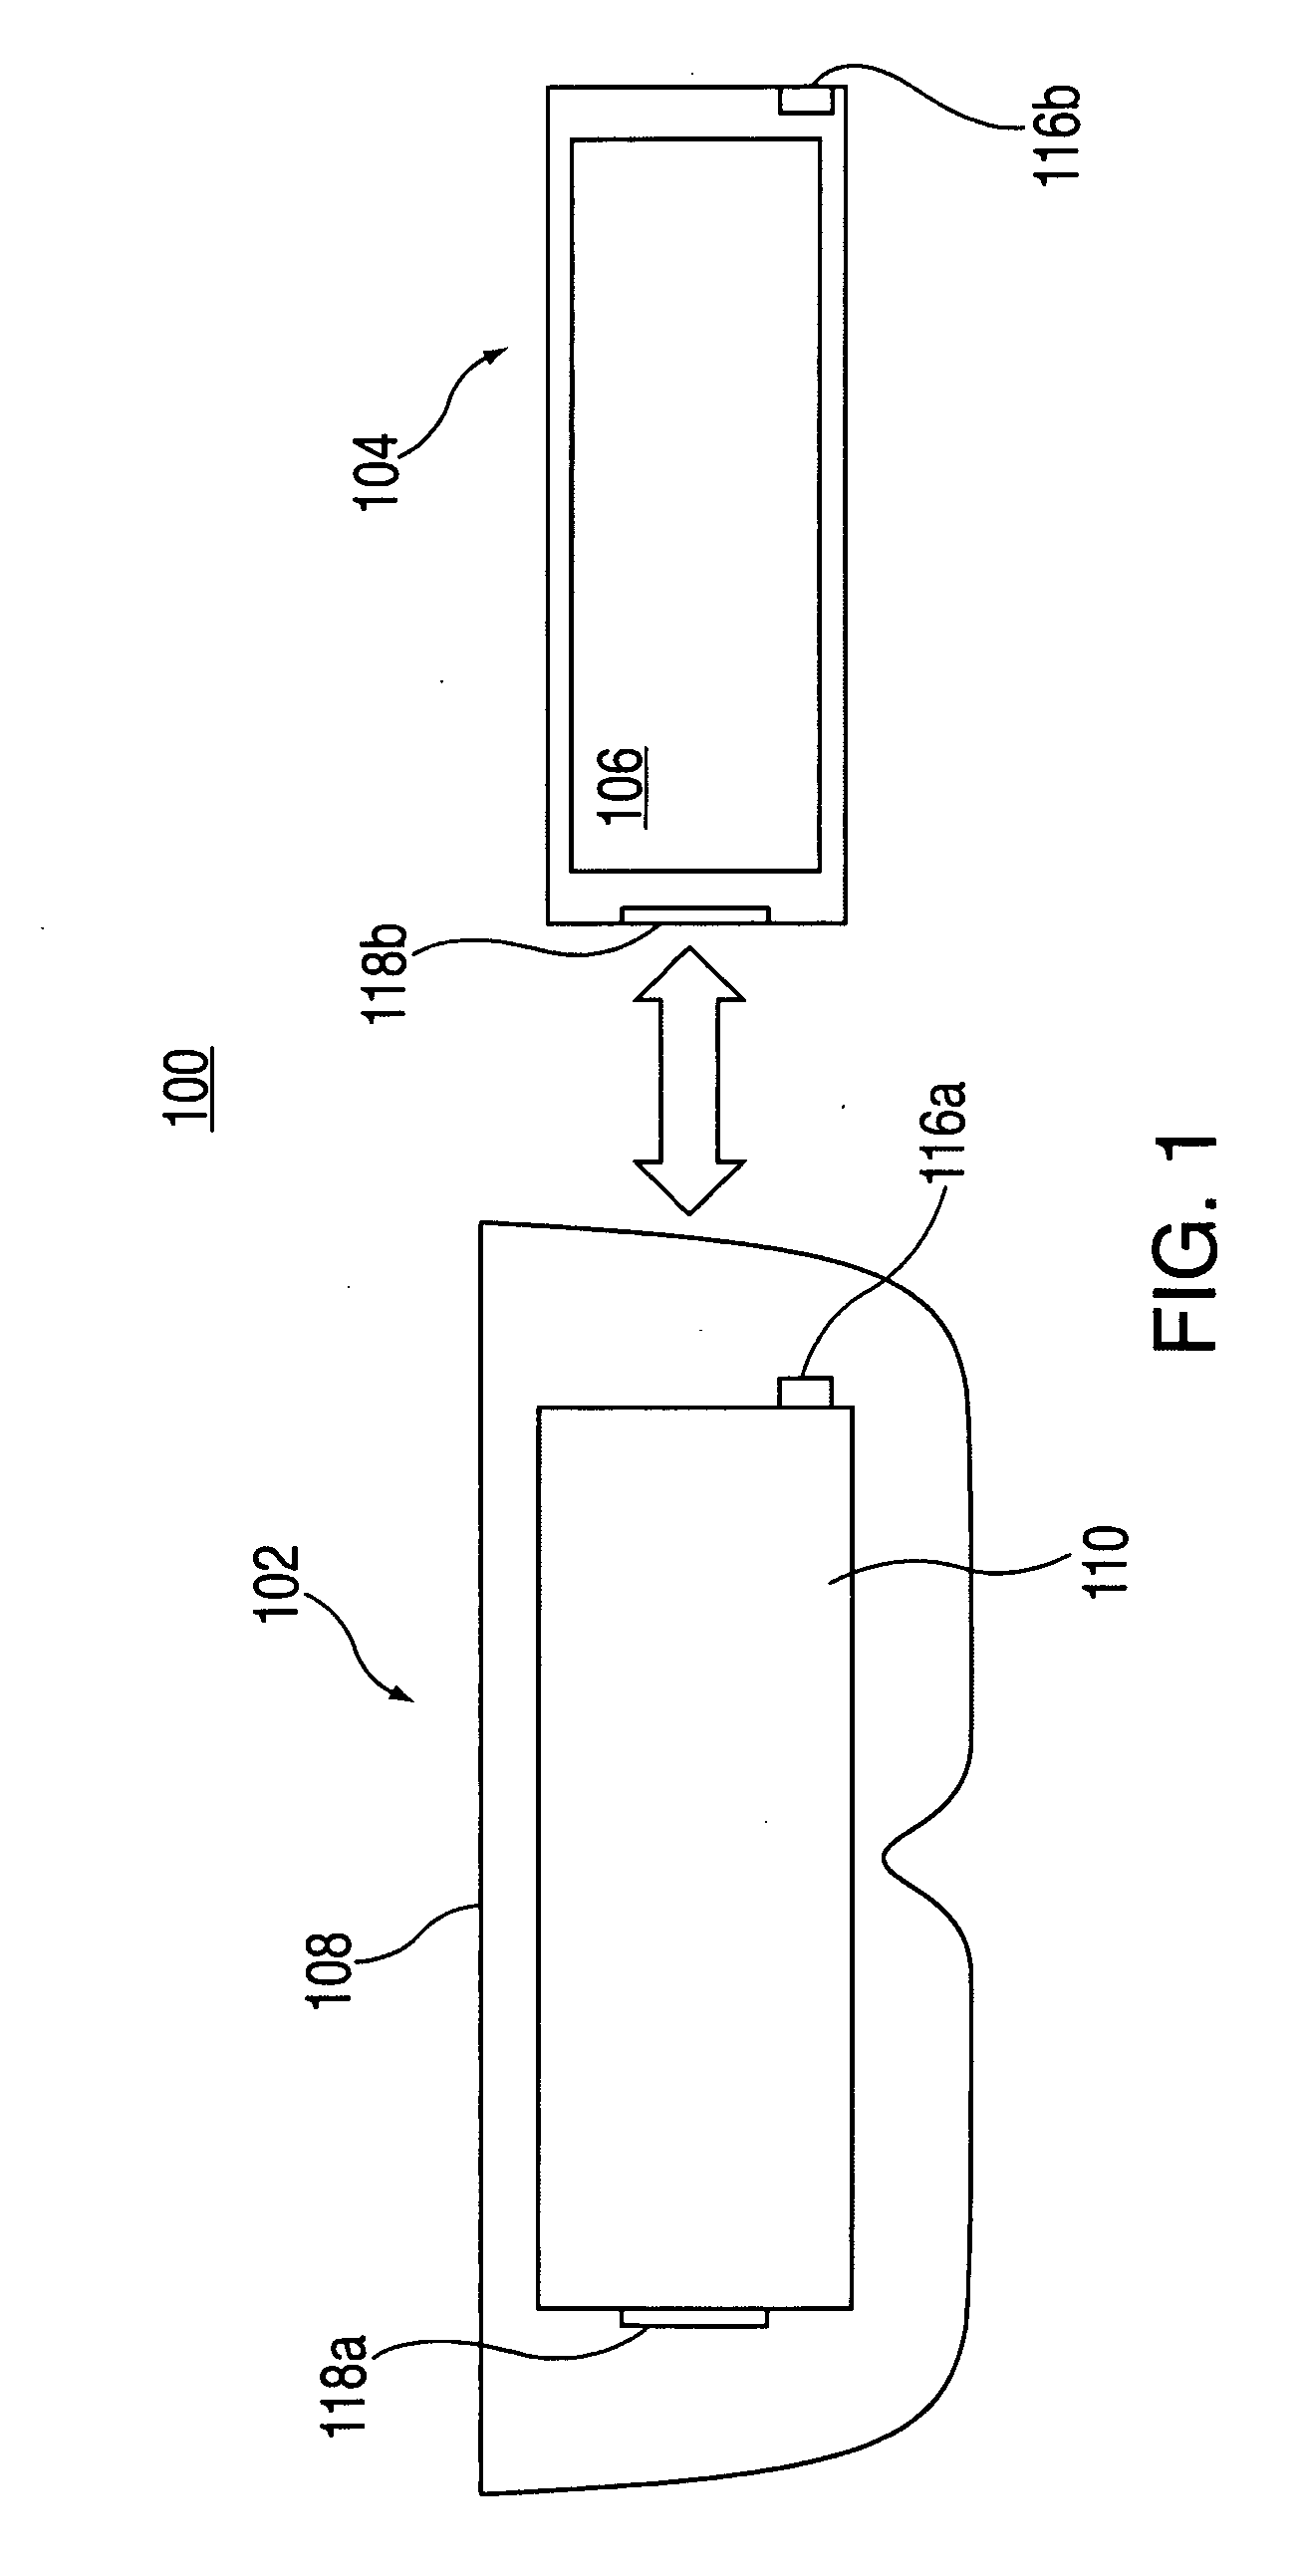 Head-mounted display apparatus for retaining a portable electronic device with display